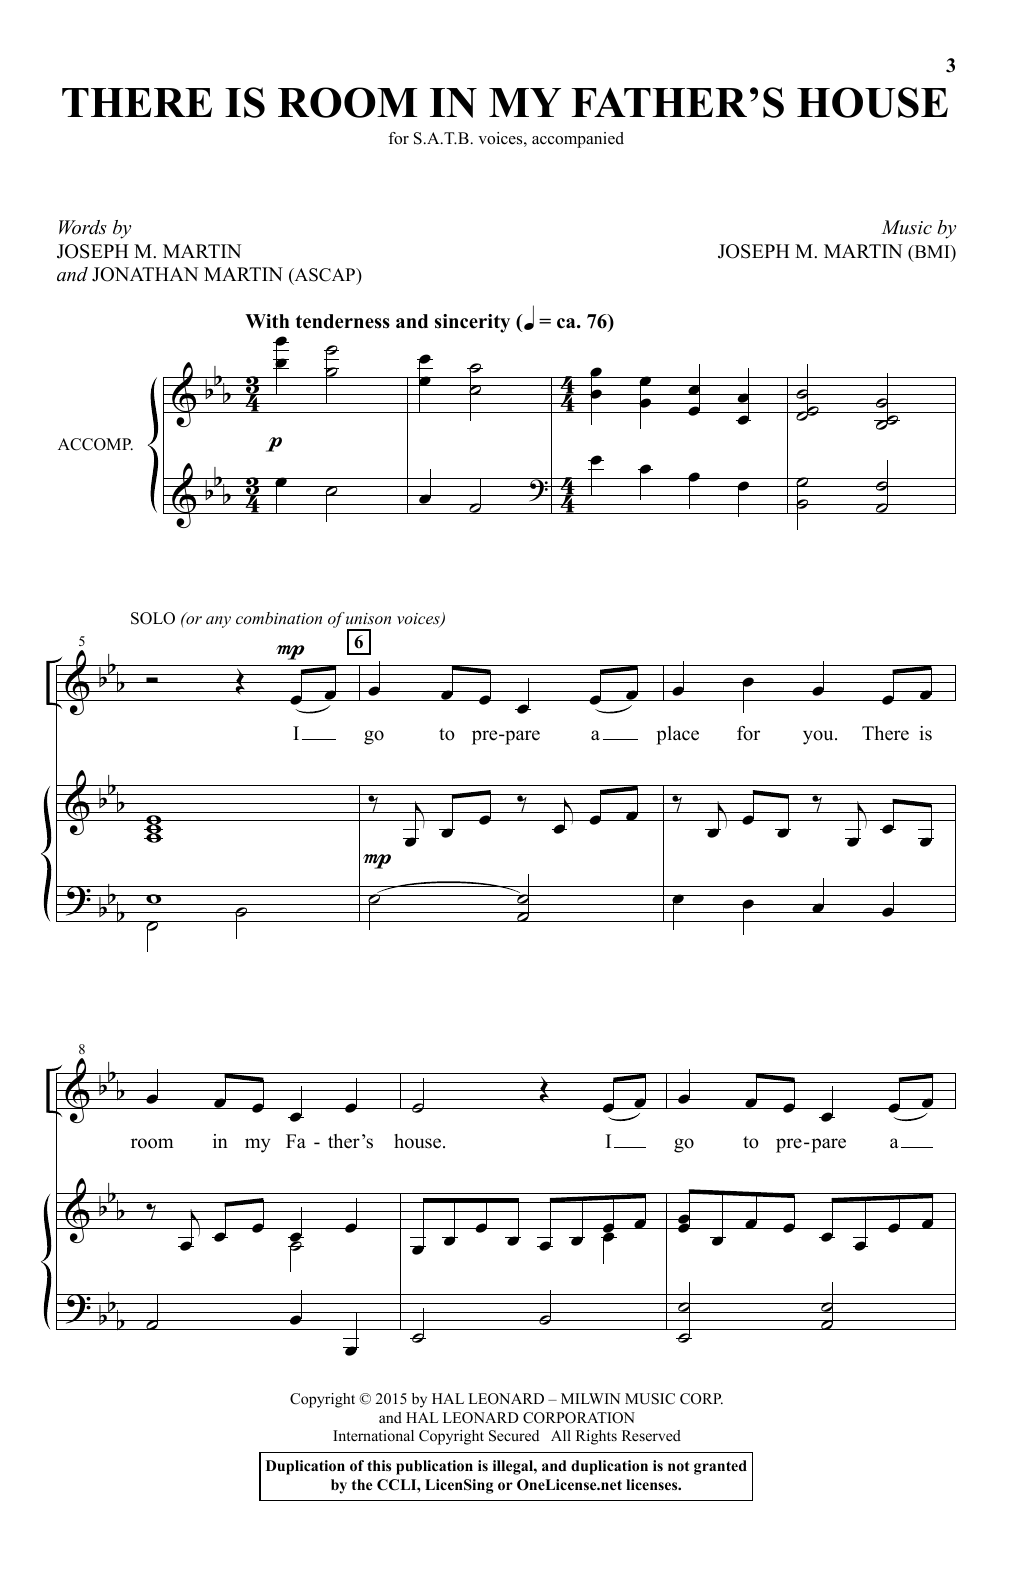 Download Joseph M. Martin There Is Room In My Father's House Sheet Music